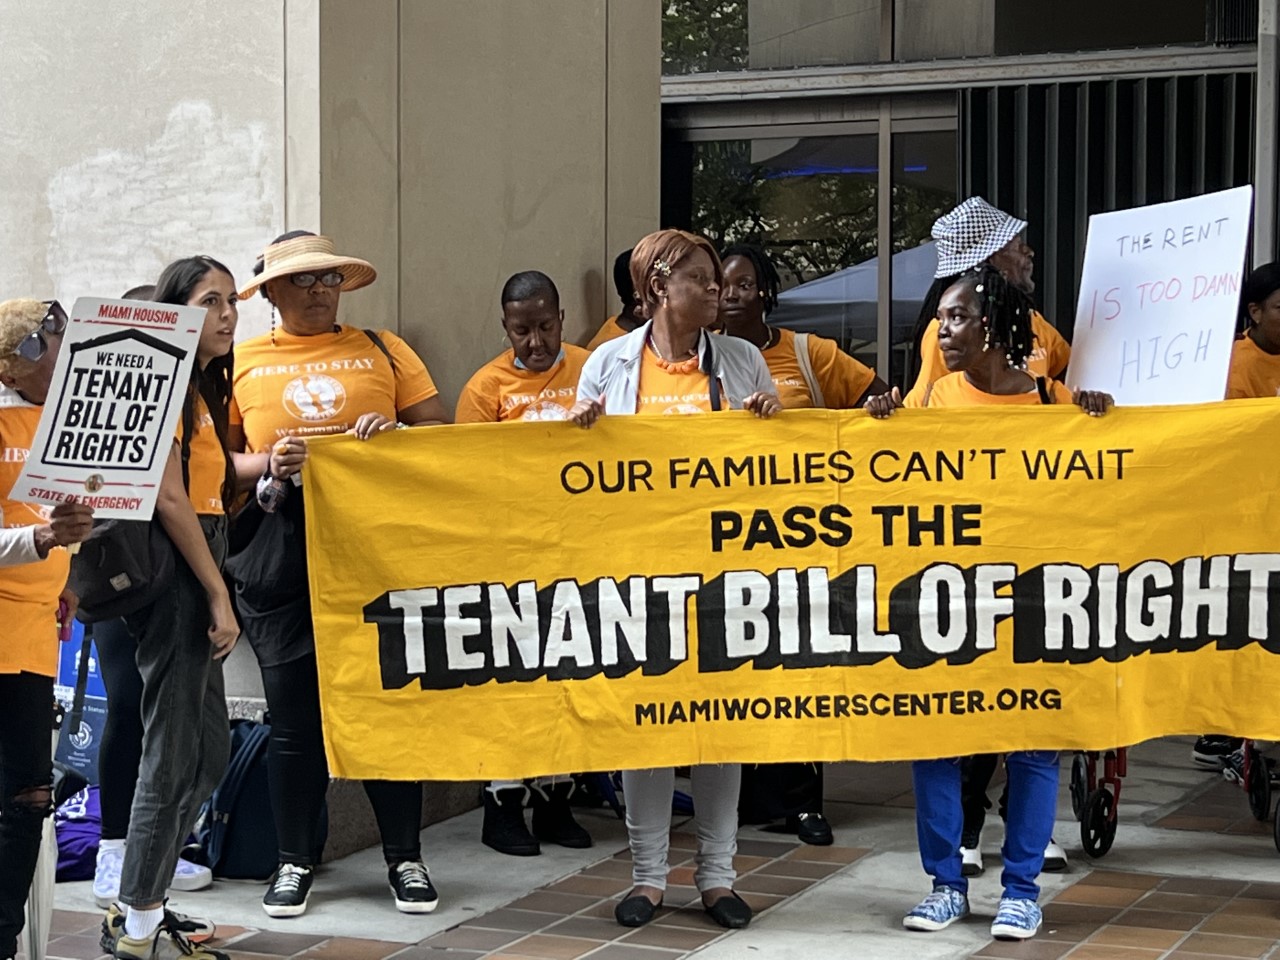 Fed Up With Rent Increases, Miami-Dade Protesters Want Tenant’s Bill Of Right